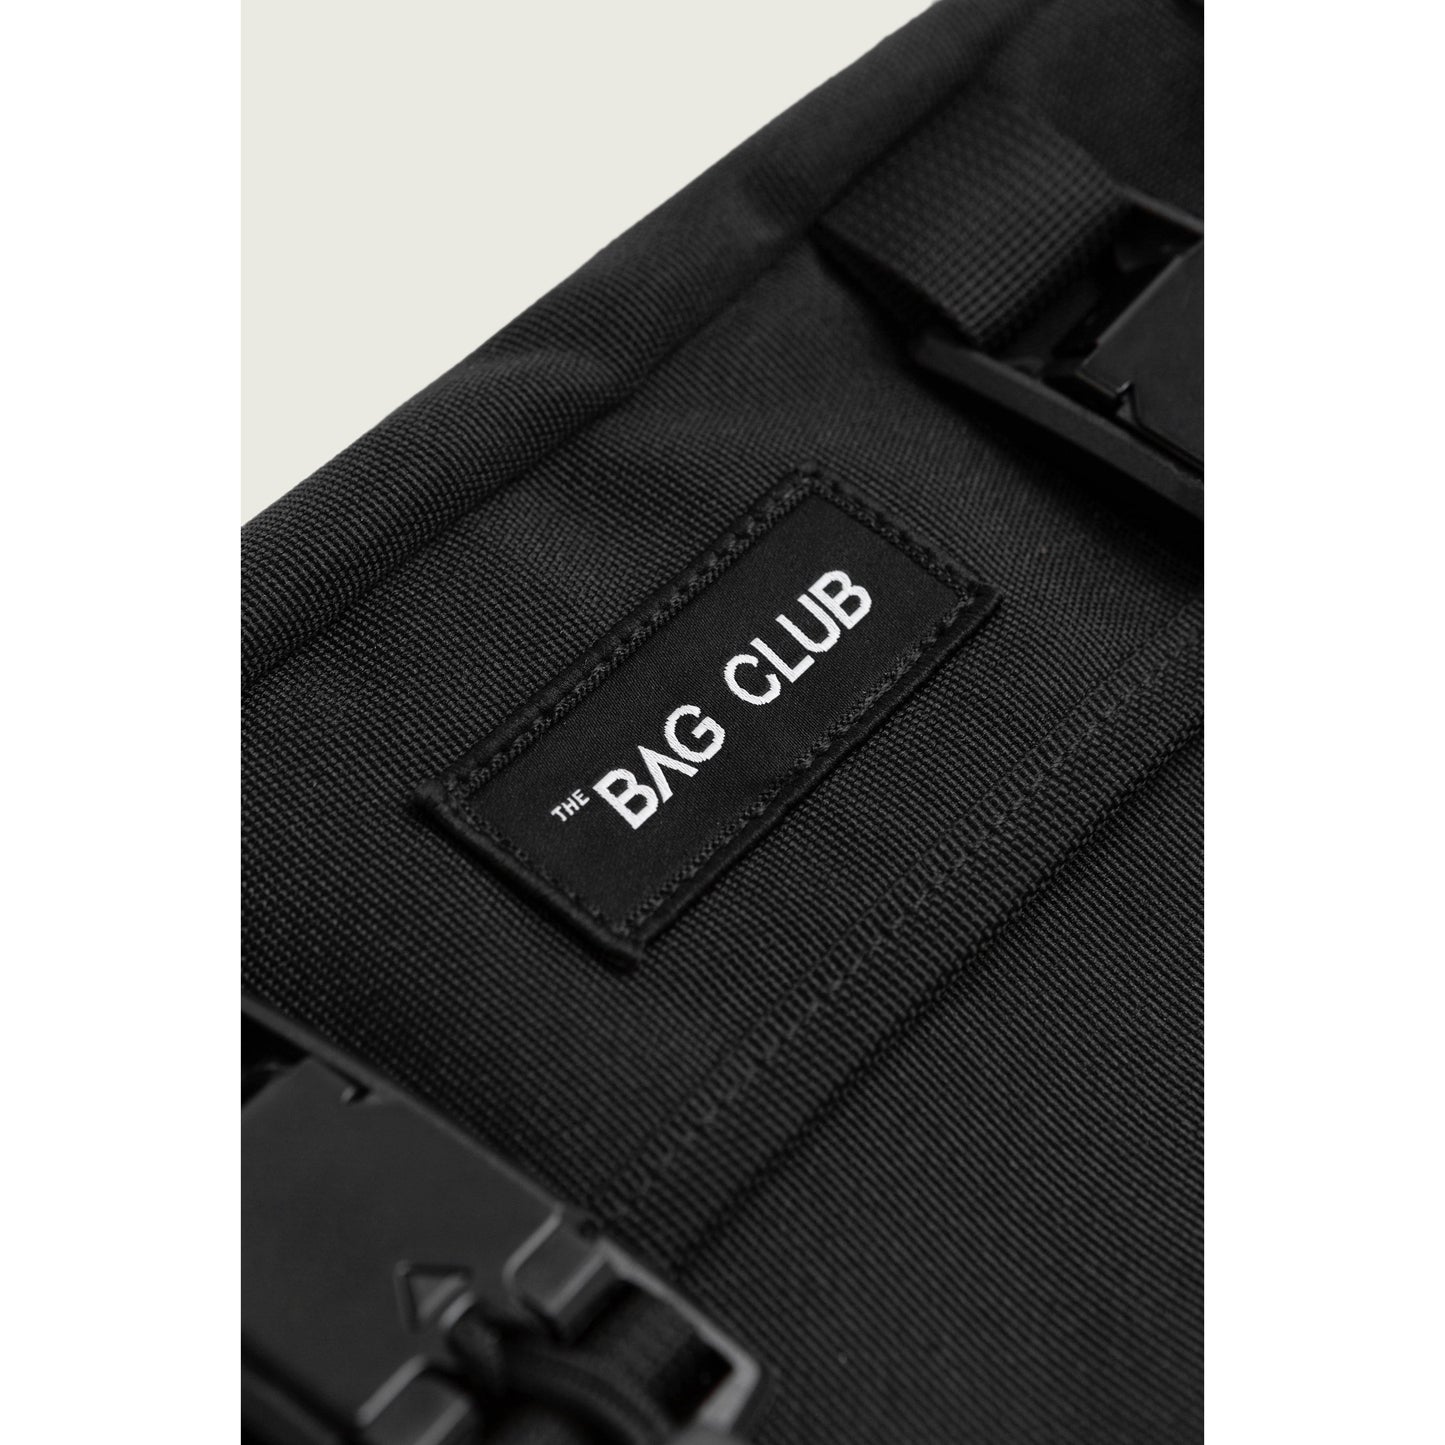 HYPExSTORE® THE BAG CLUB BAG